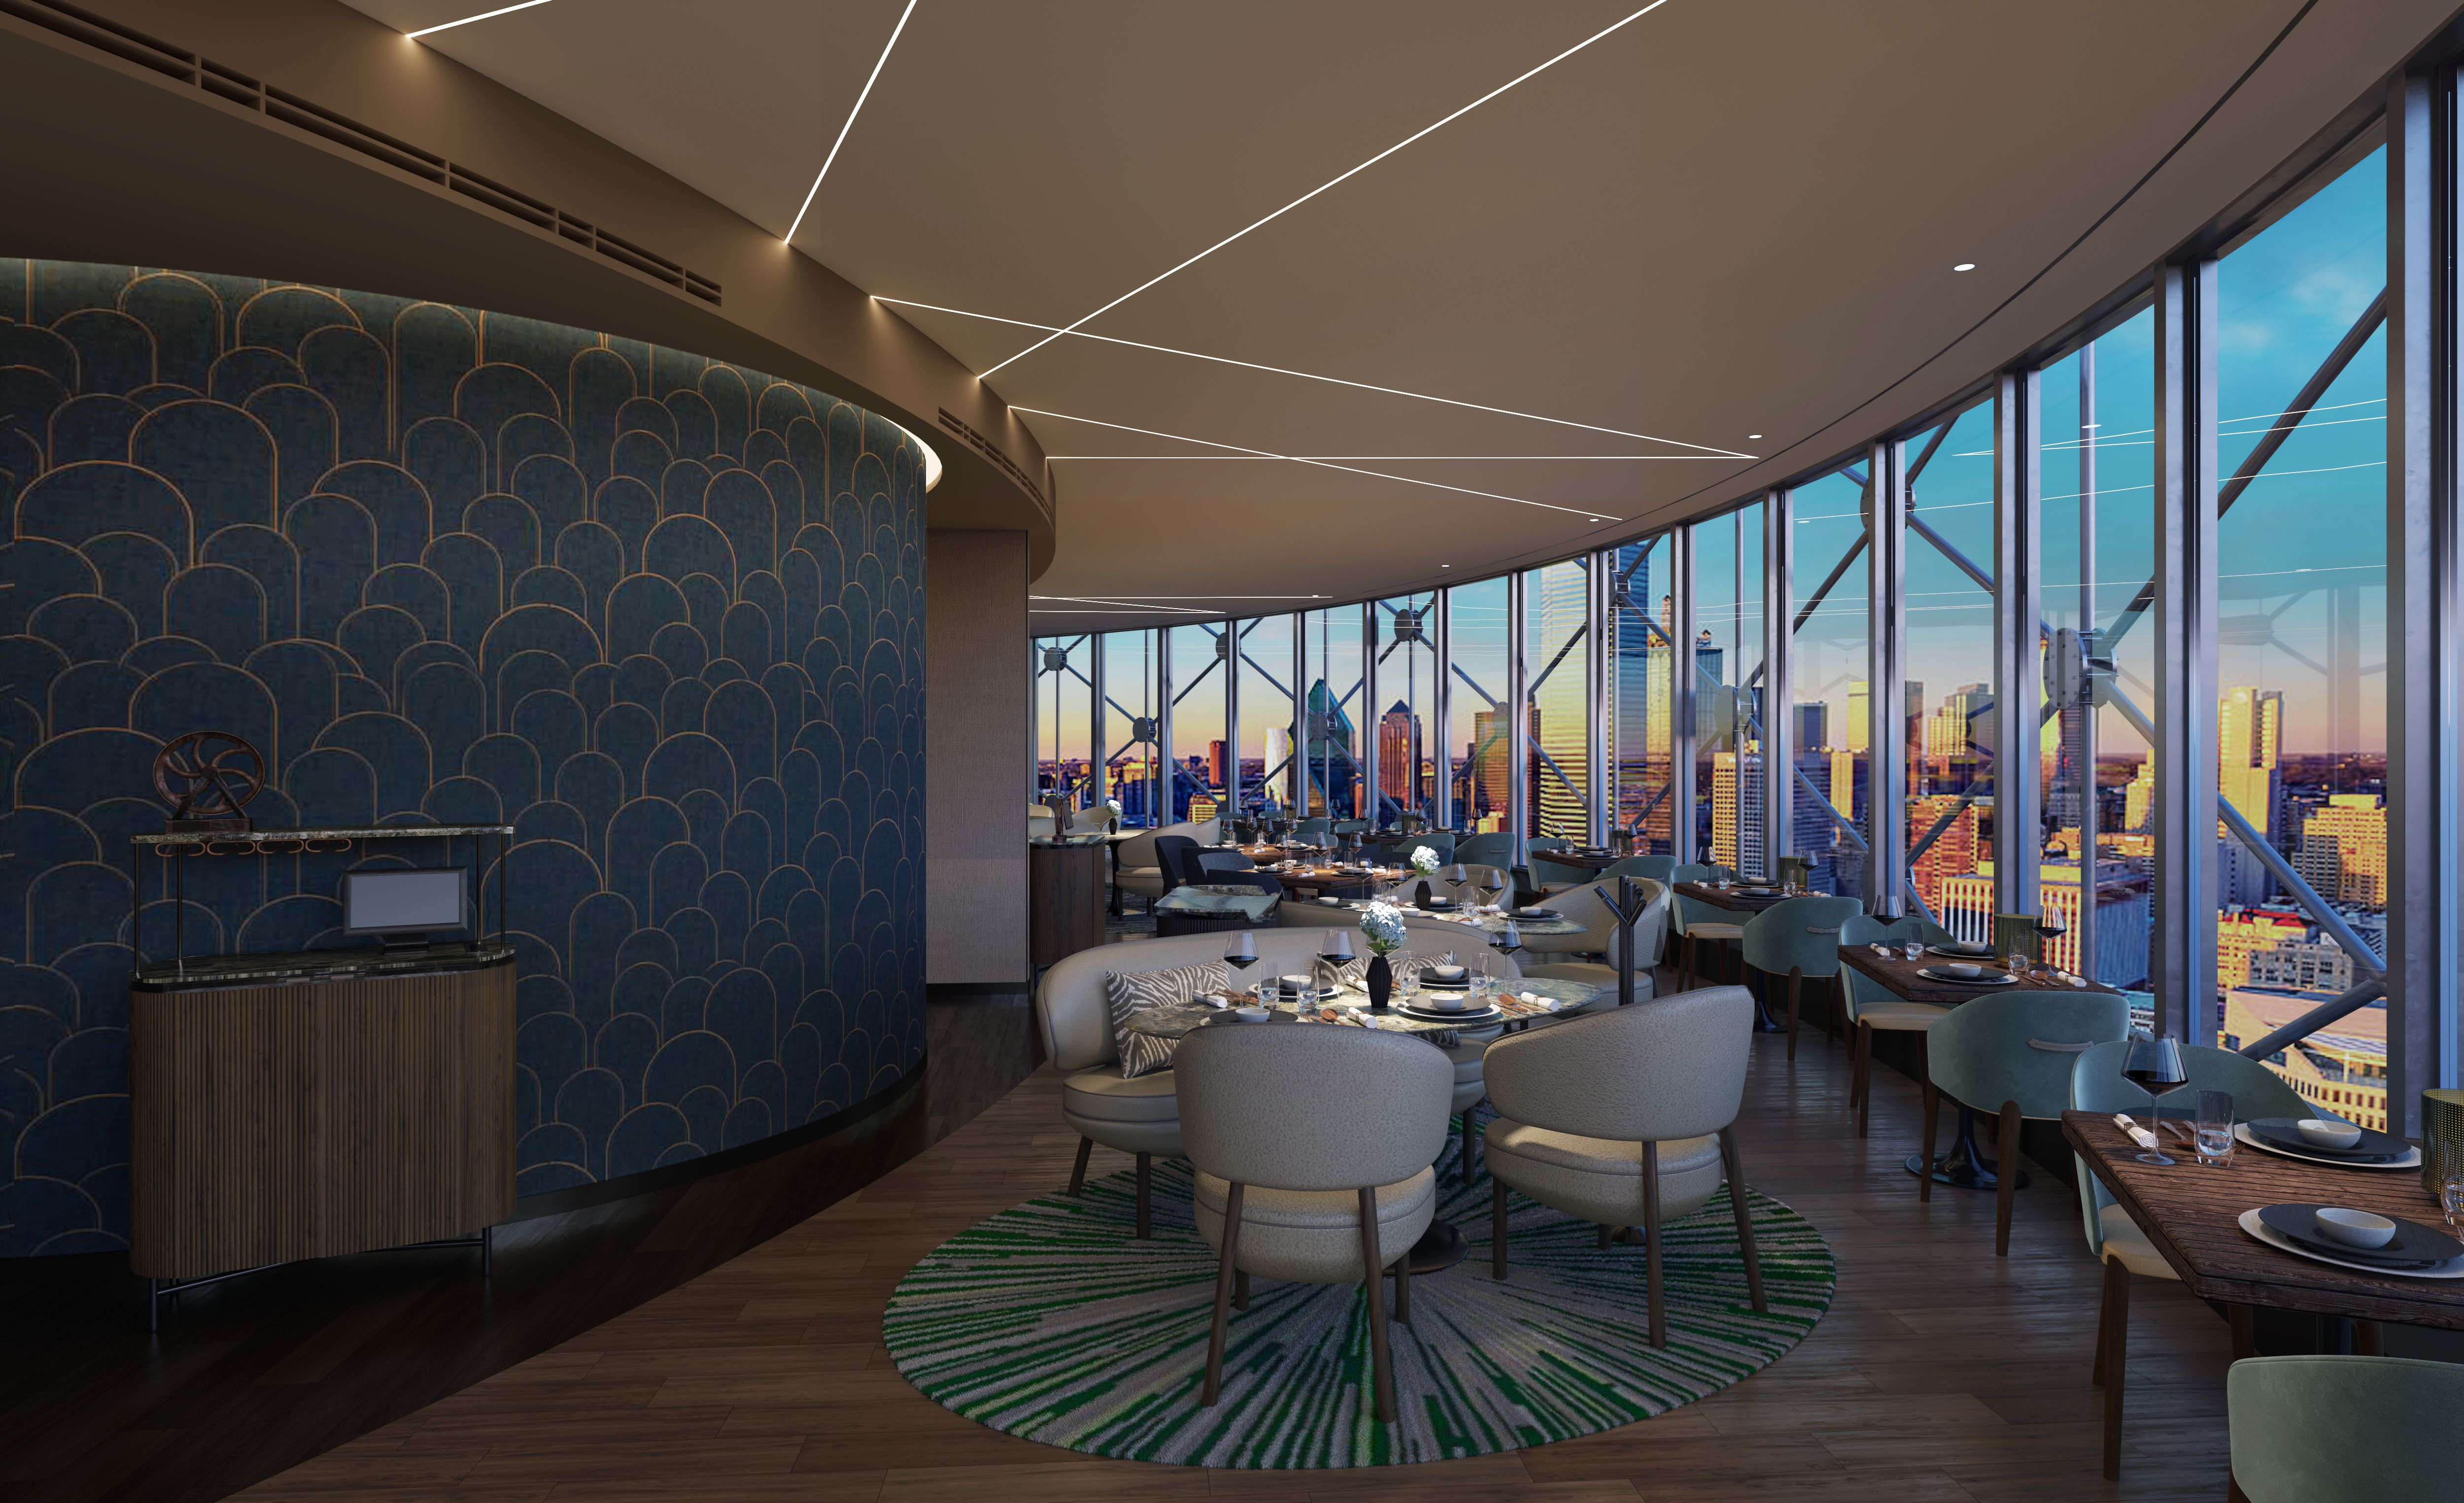 A dining room features wooden tables, grey chairs, blue and gold art deco style wallpaper, and 360 degree views of the Dallas Skyline.